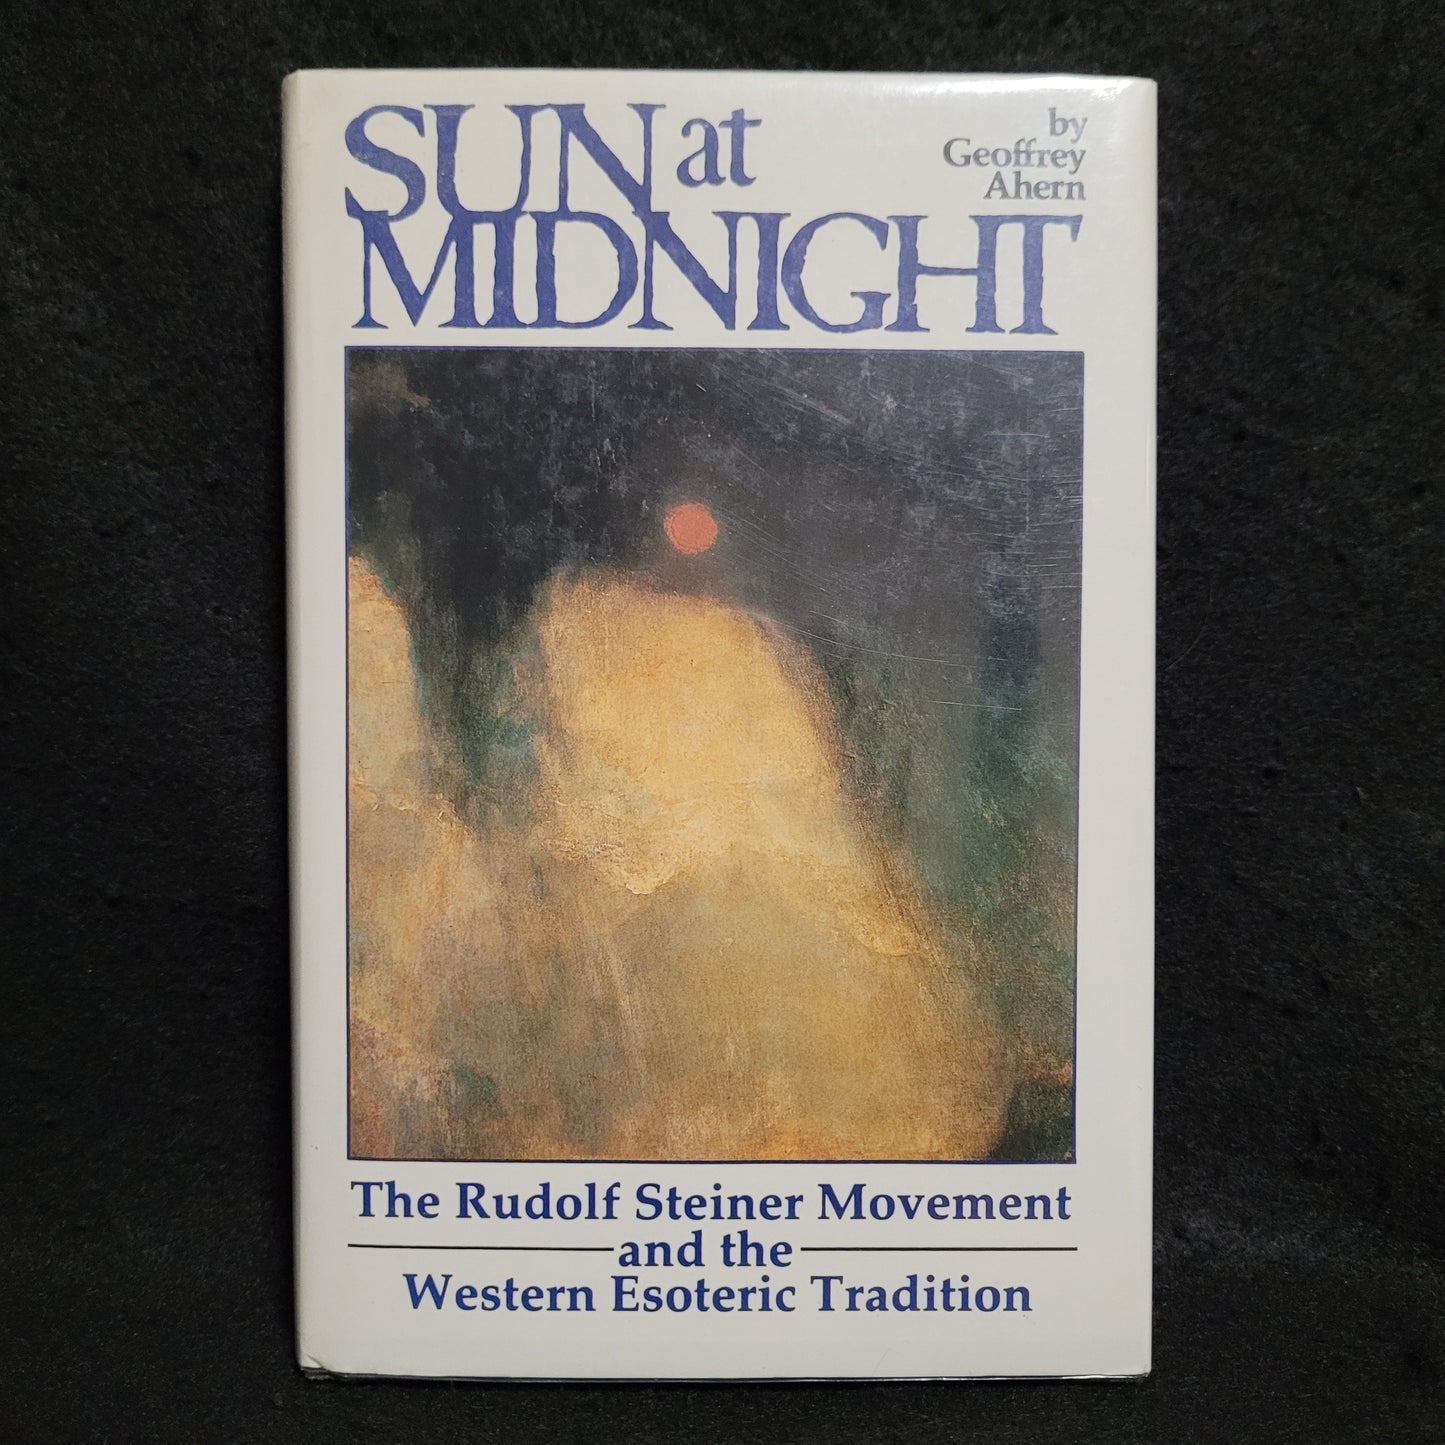 Sun at Midnight: The Rudolf Steiner Movement and the Western Esoteric Tradition by Geoffrey Ahern (The Aquarian Press, 1984) First Edition Hardcover